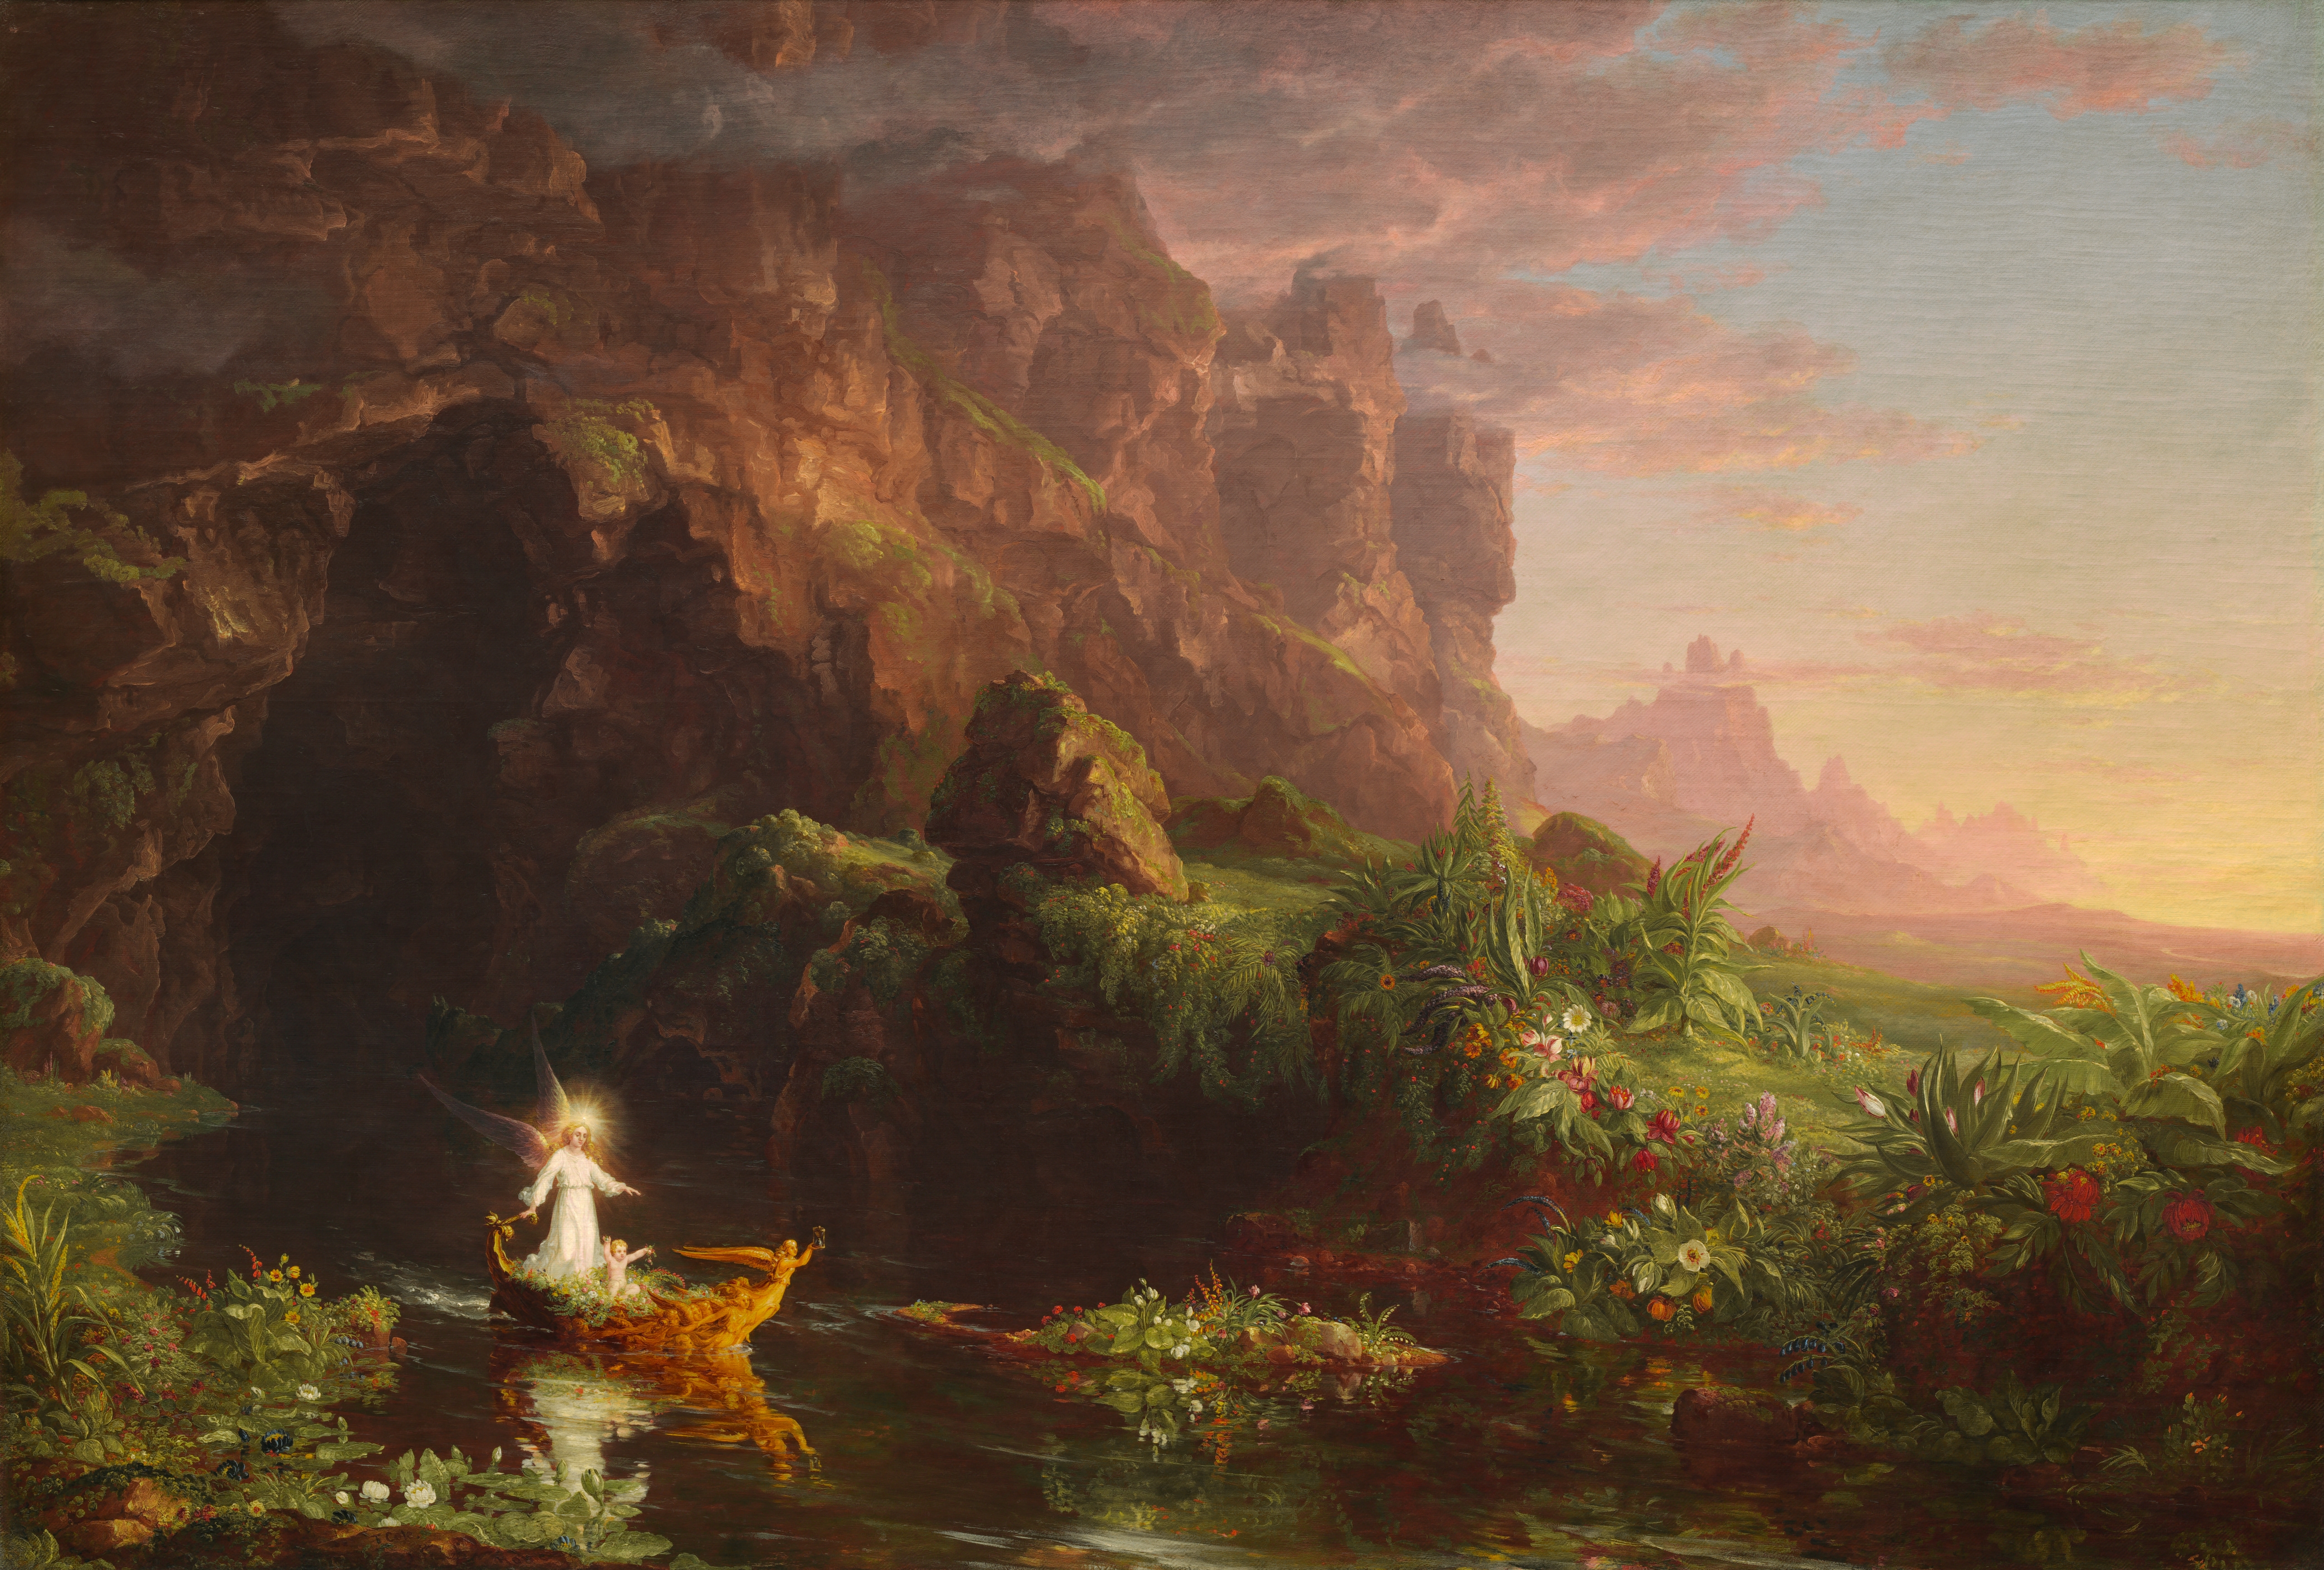 Thomas Cole - The Voyage of Life Childhood, 1842 (National Gallery of Art)